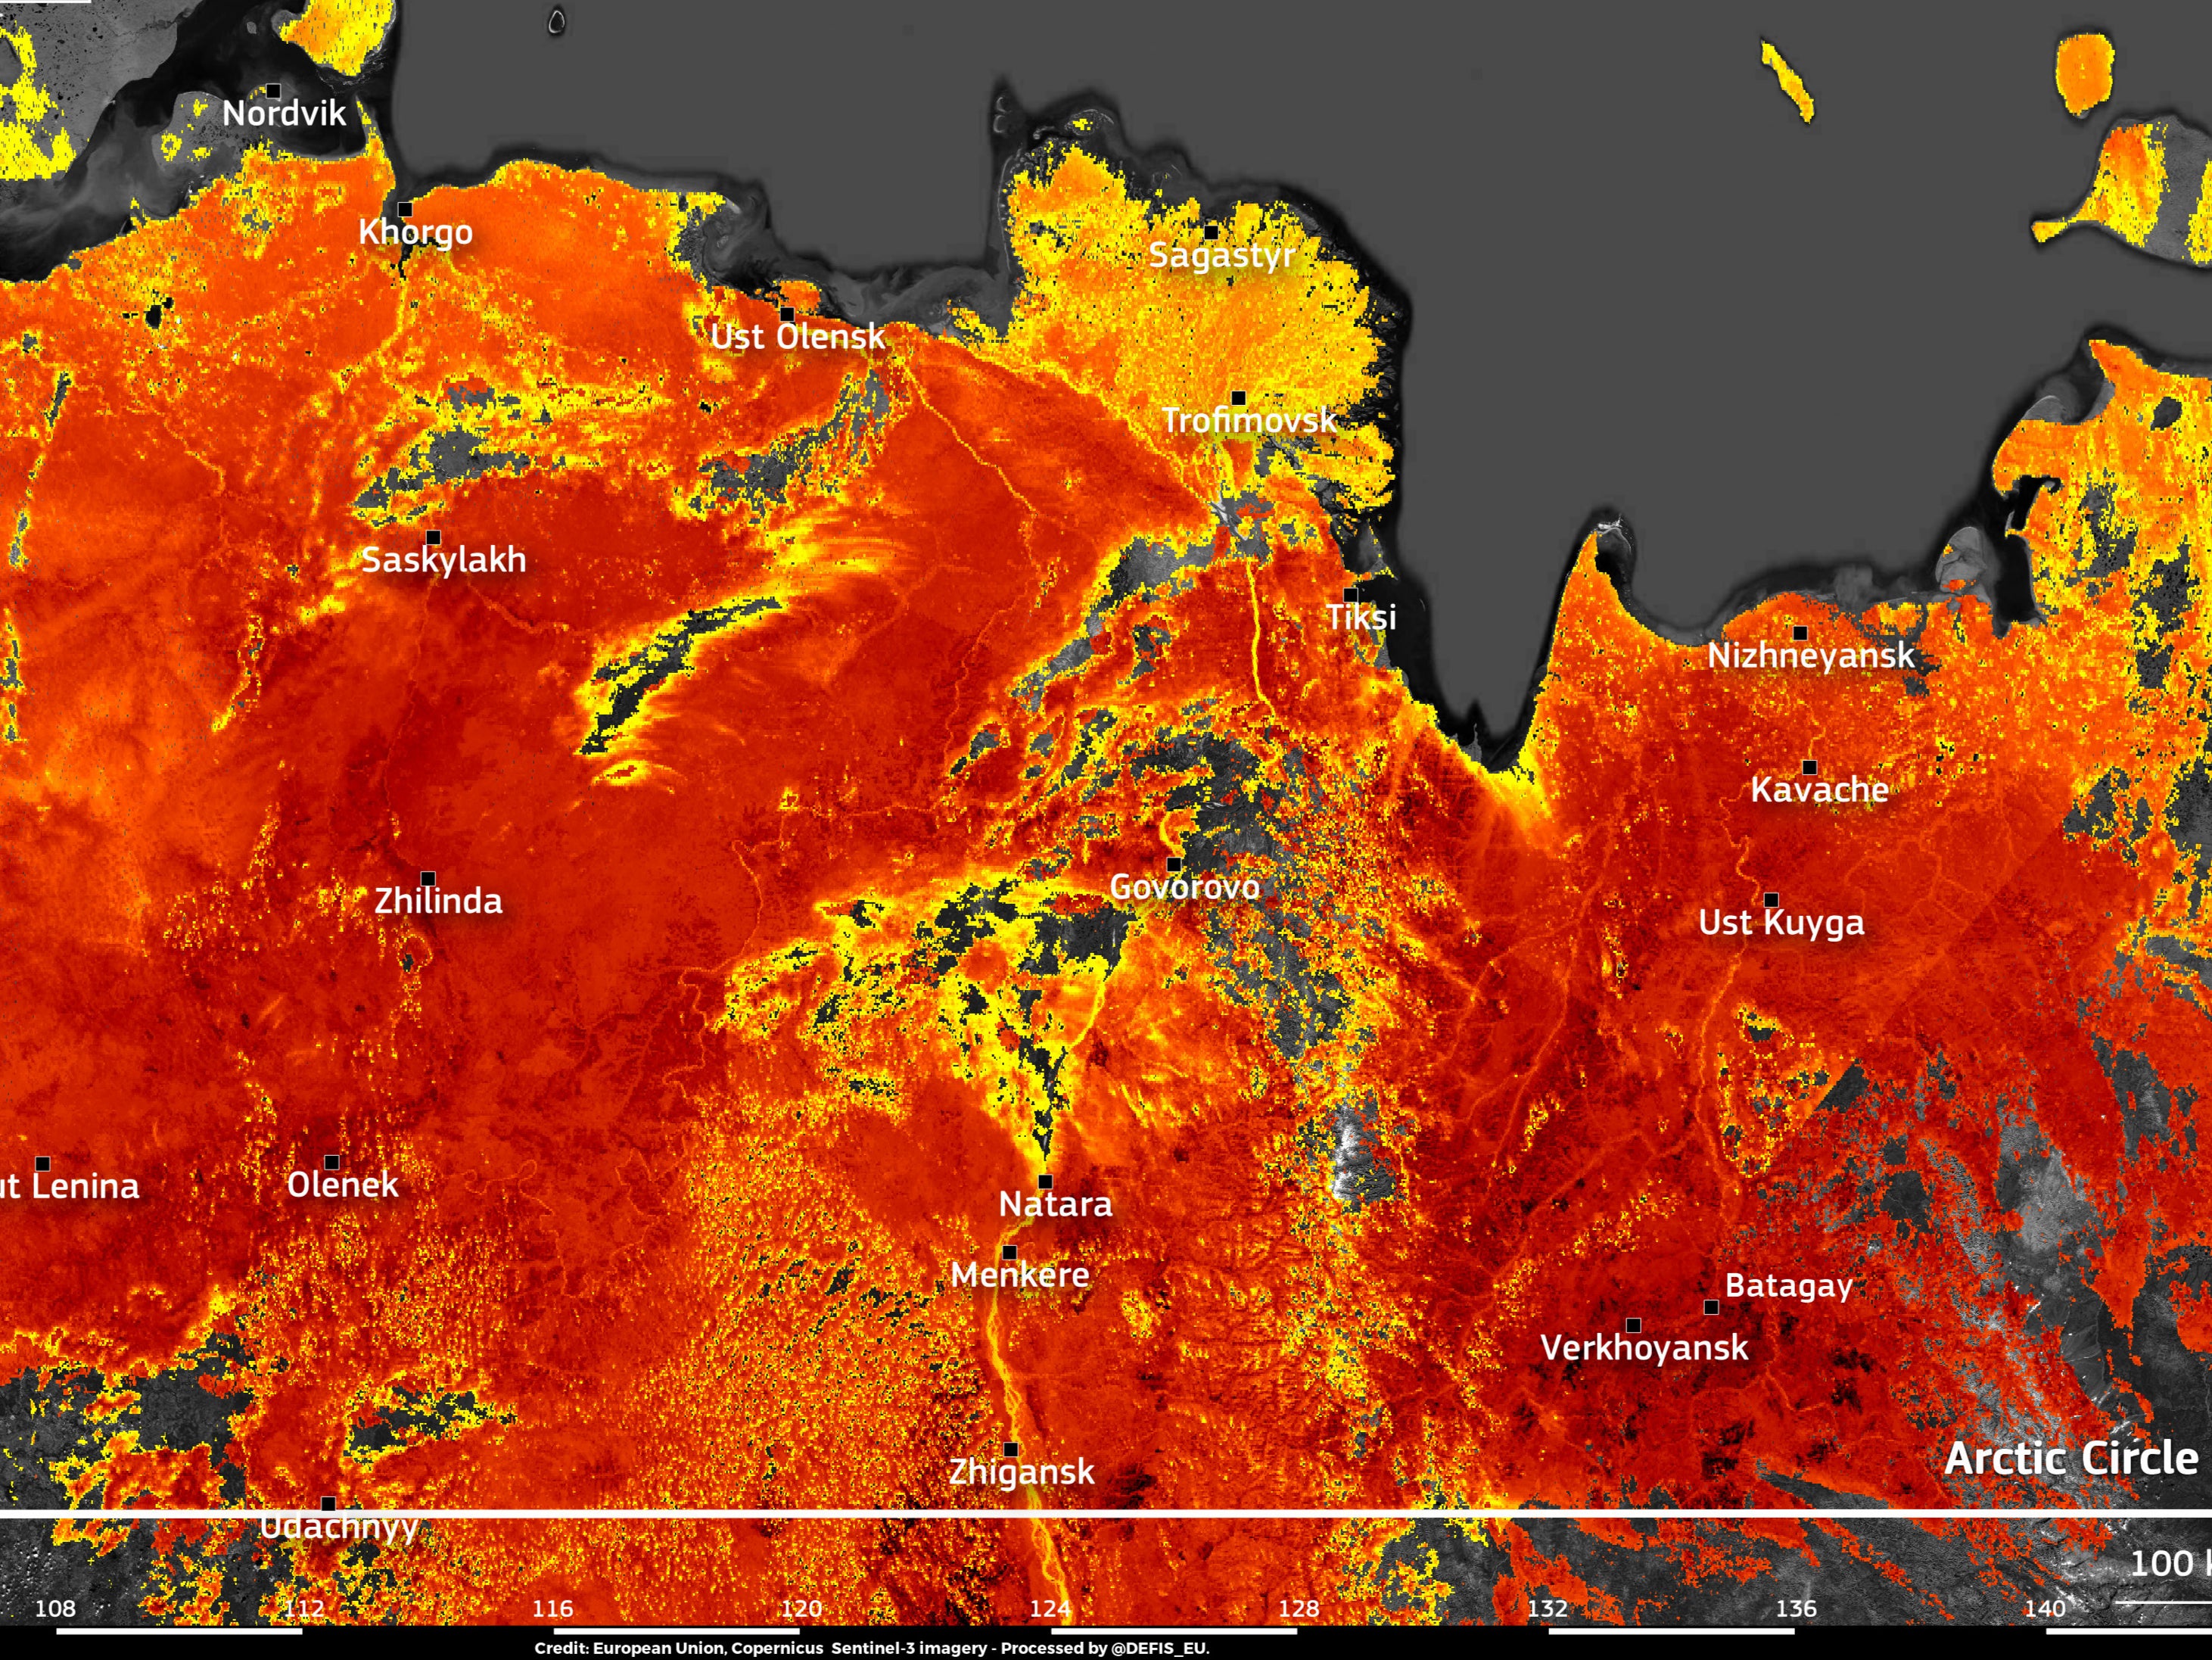 Image taken by the EU’s Copernicus Sentinel-3 satellite shows land surface temperatures reaching nearly 50C around the town of Verkhojansk